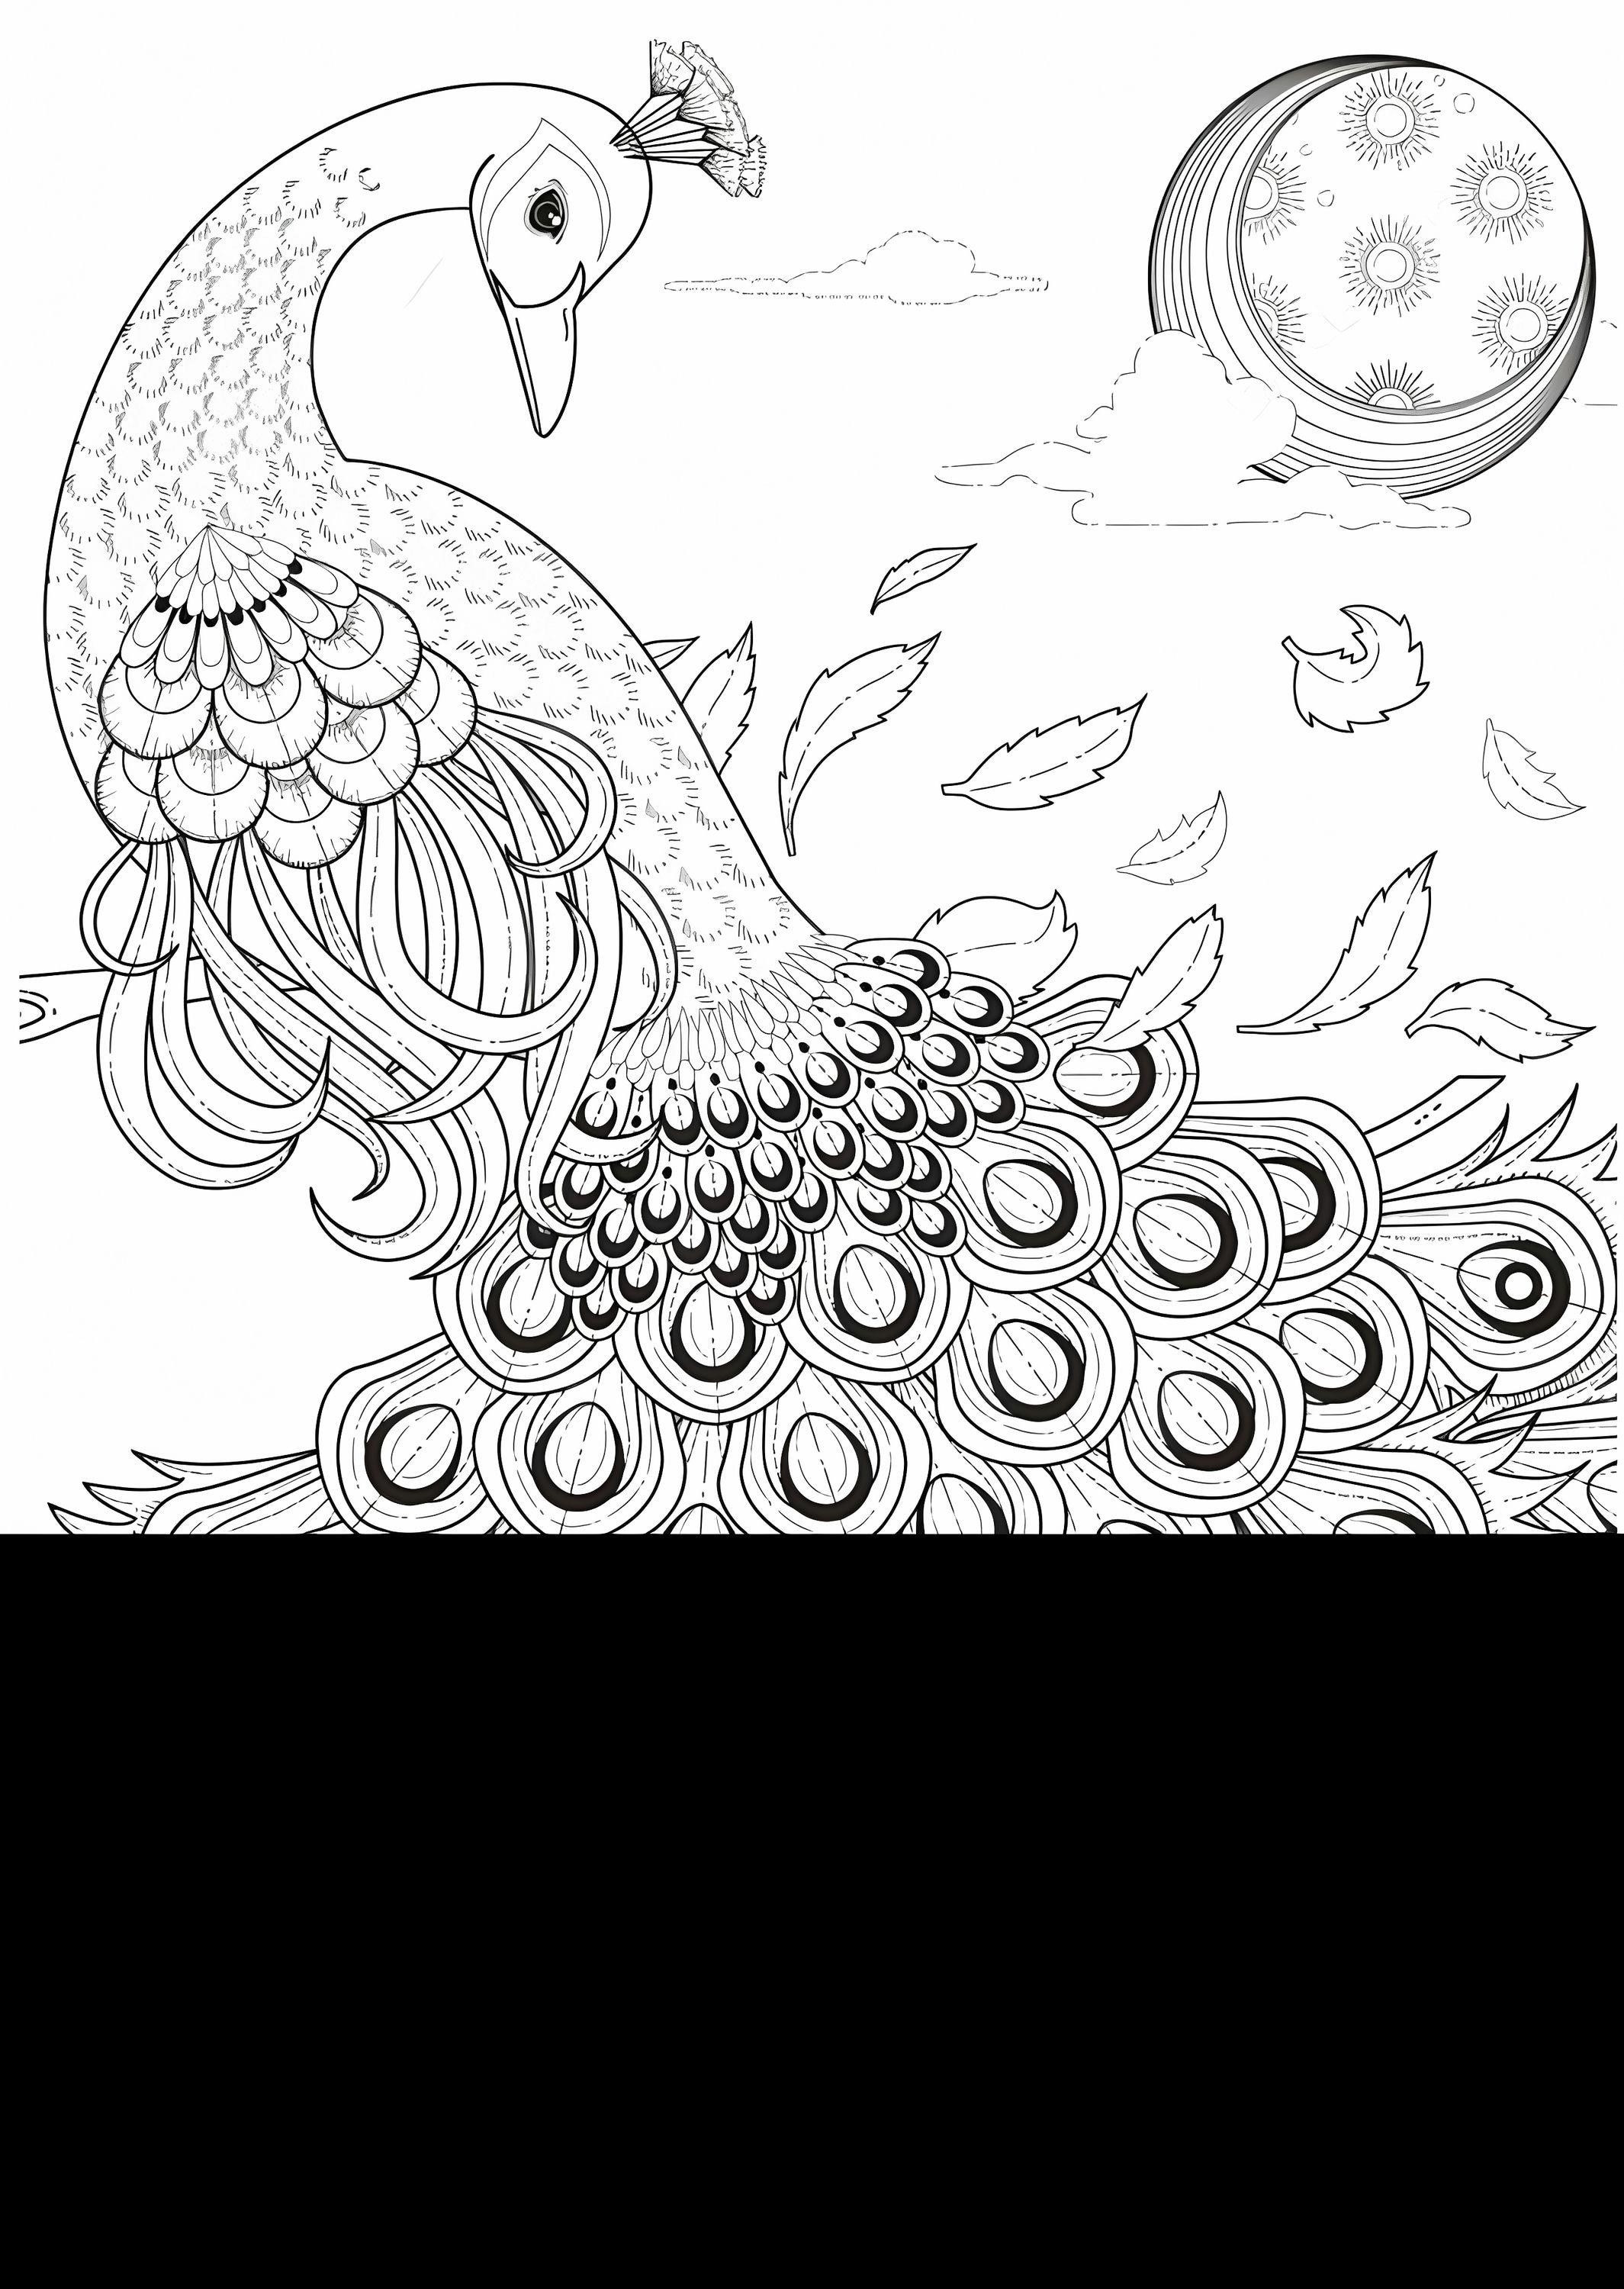 1560414639 Peacock A4 coloring page